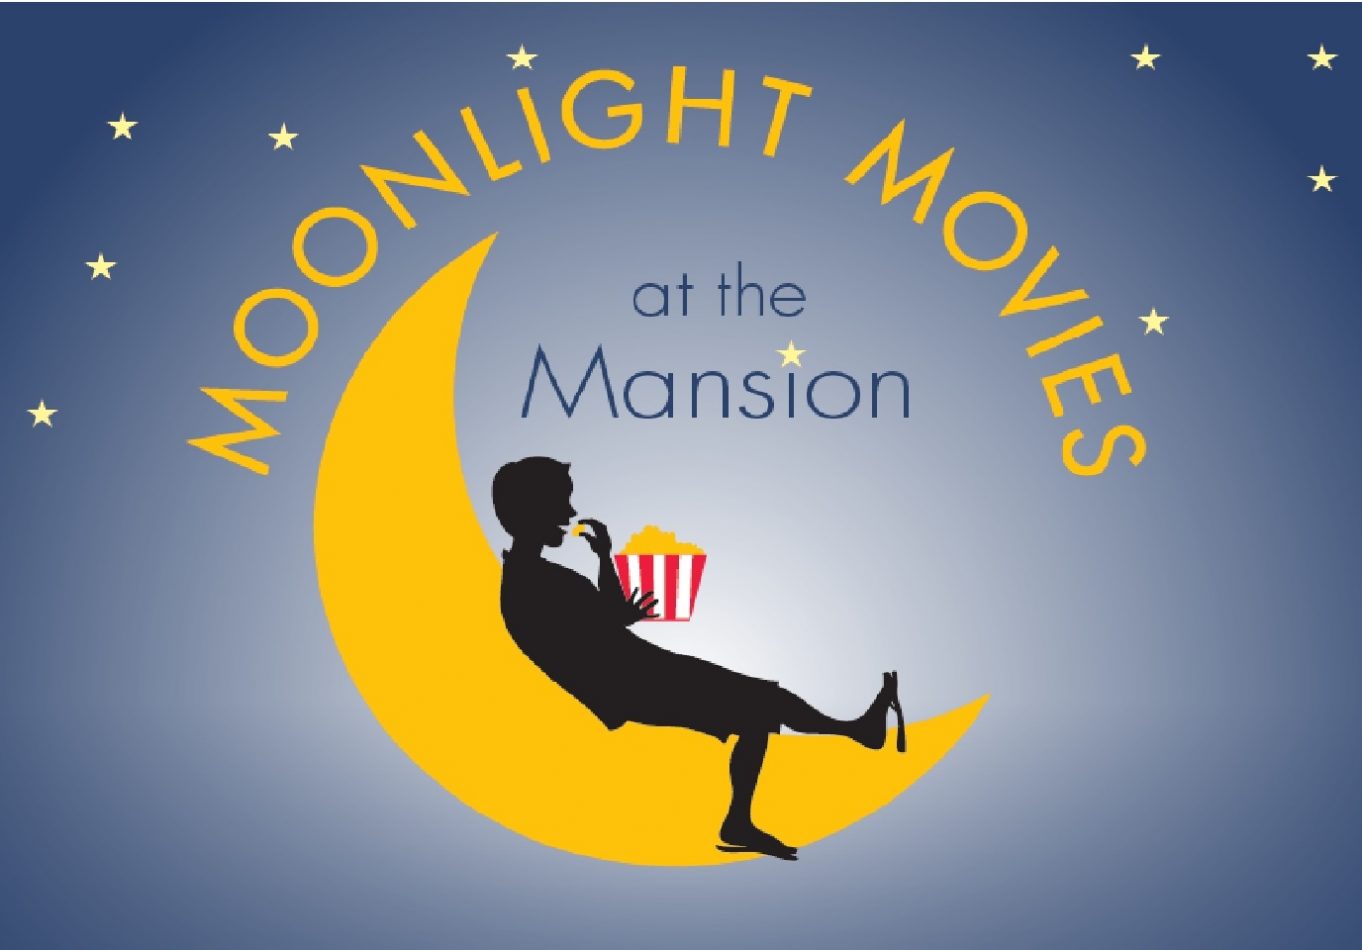 Gallery 1 - Moonlight Movies at the Mansion